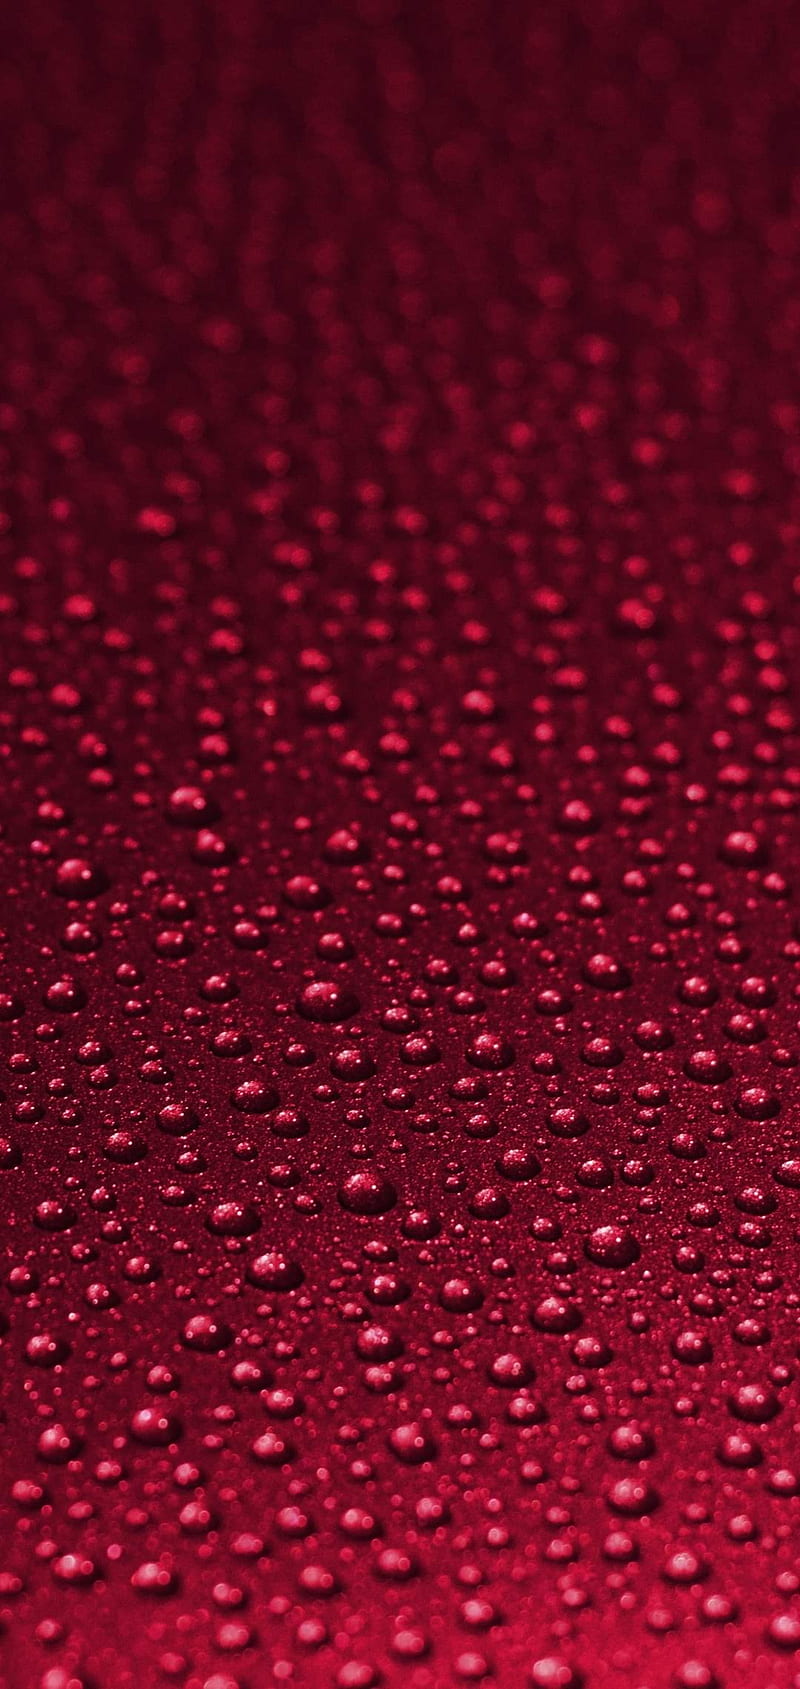 RED PATTERNED, 2020, abstract, apple, bubbles, galaxy, iphone, mobile, note, wall, HD phone wallpaper